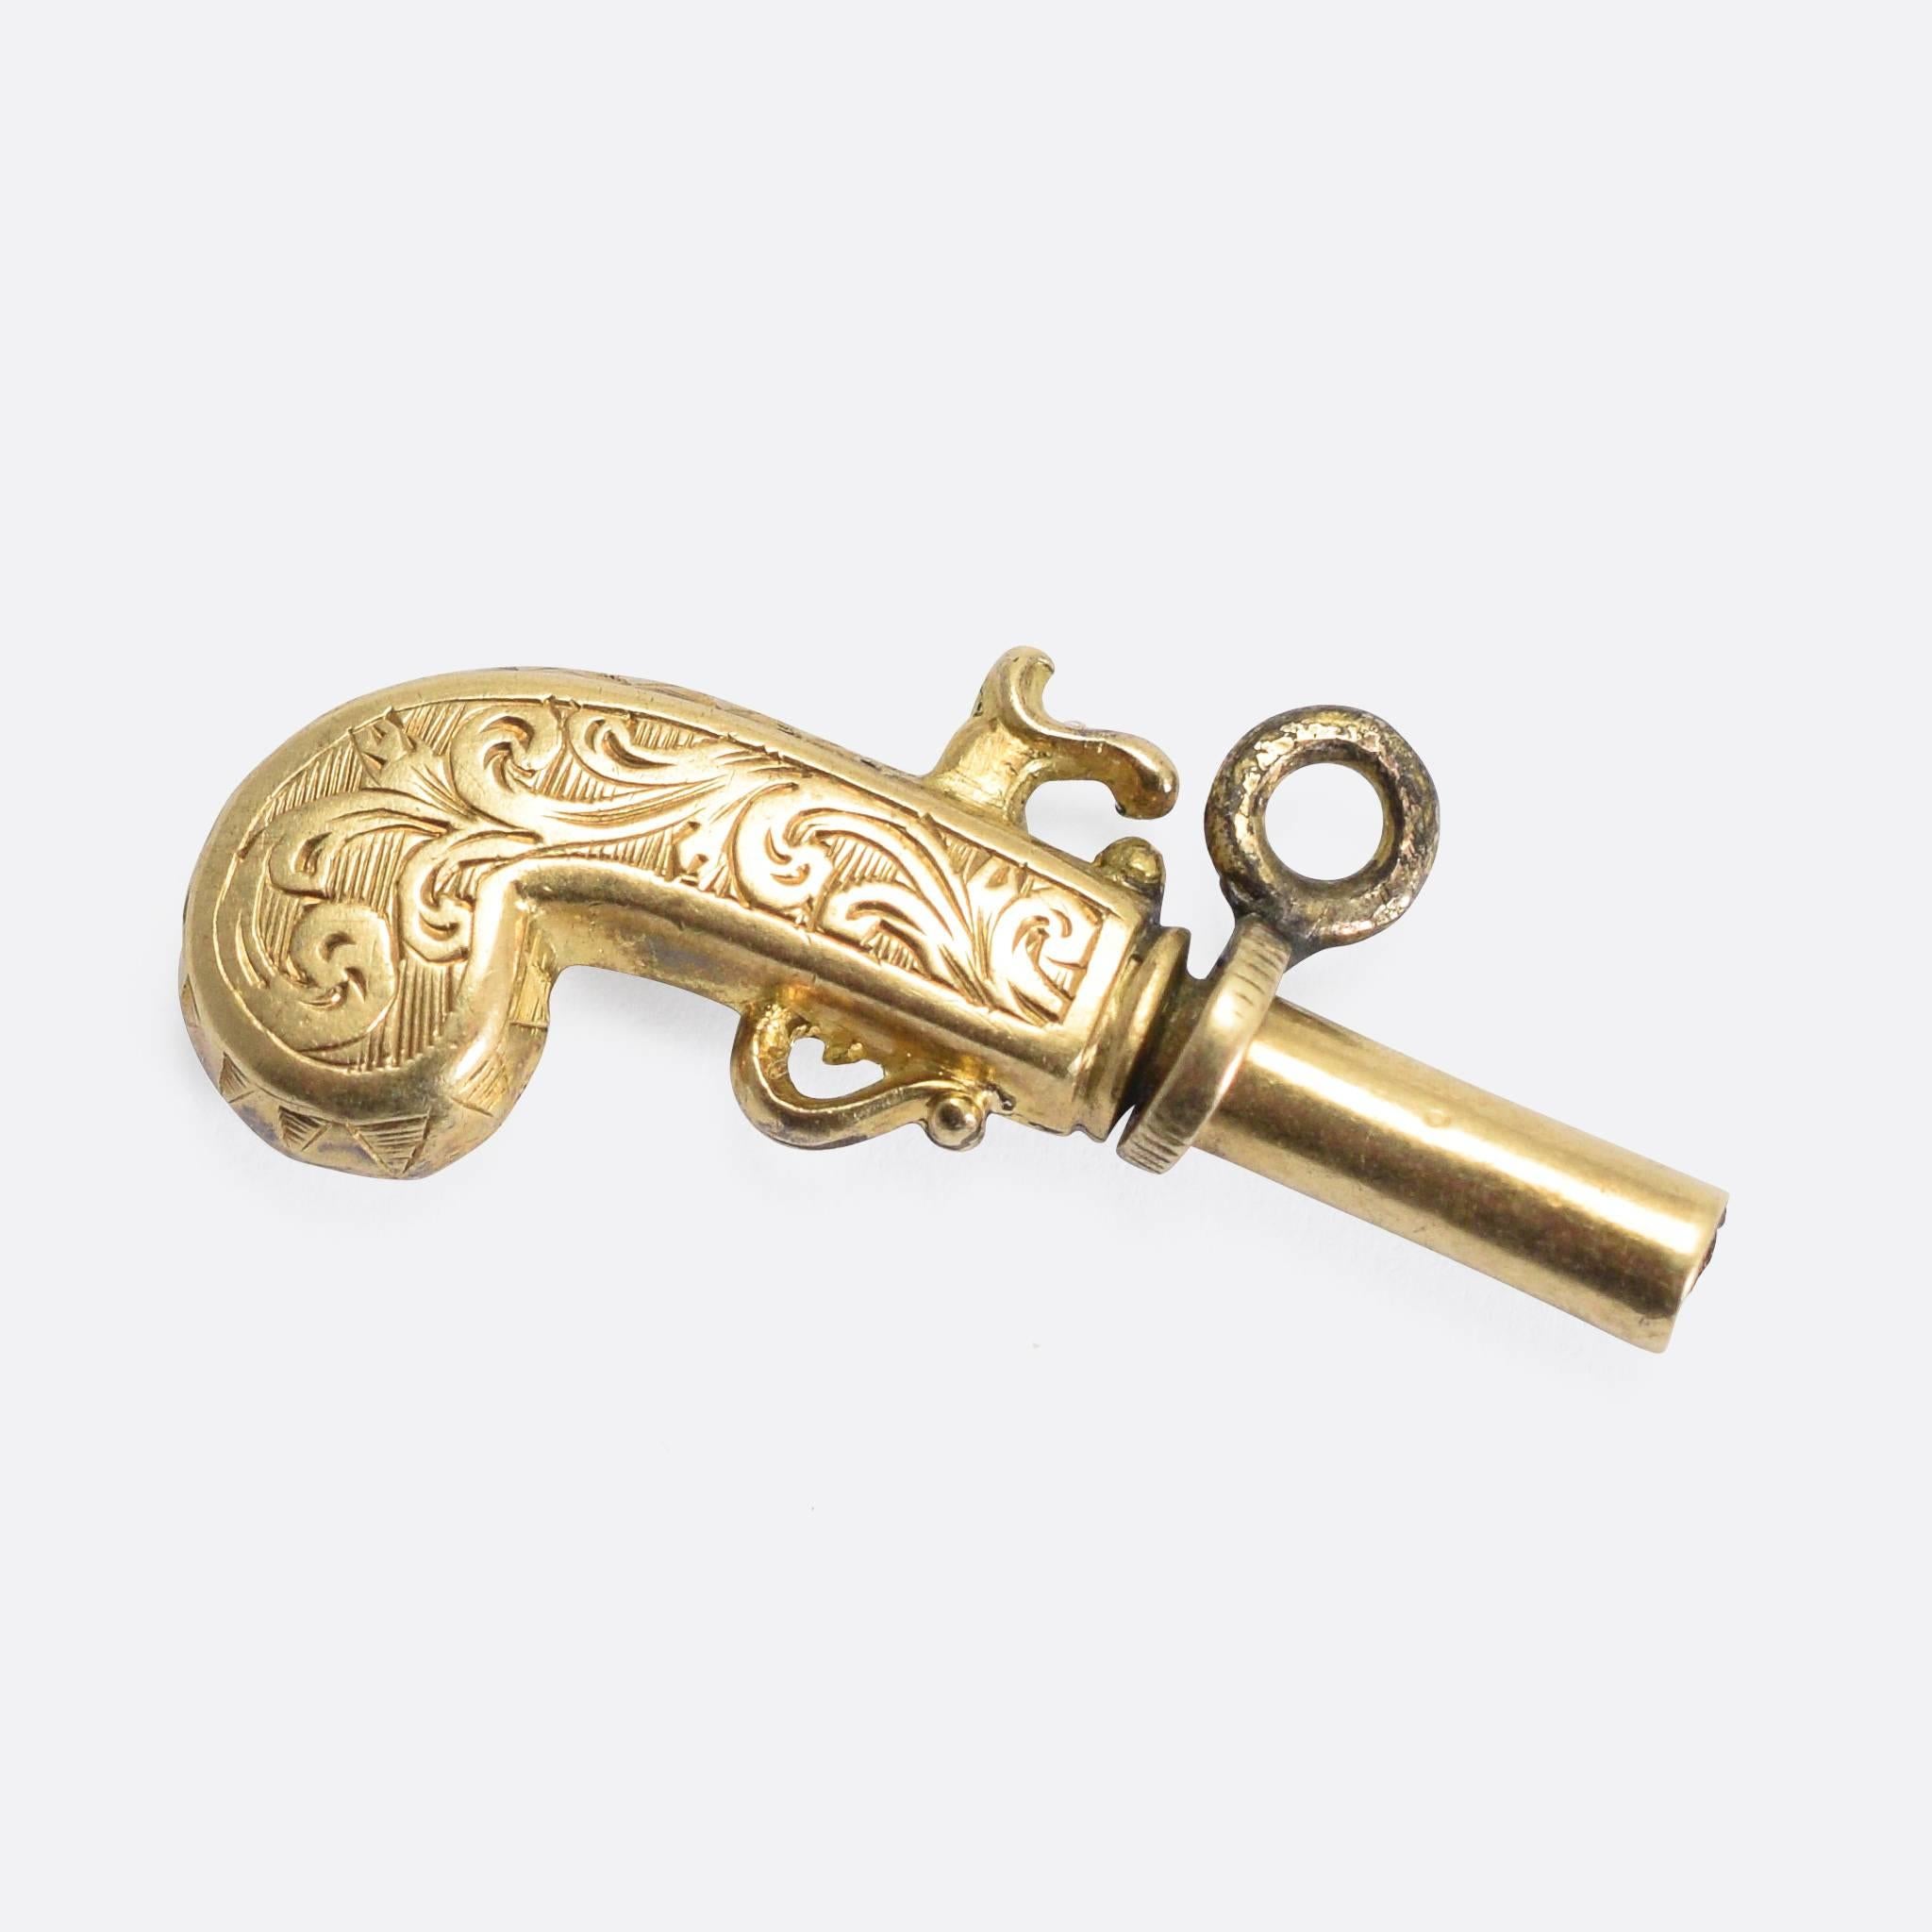 A cool late Georgian charm pendant, modelled as an 18th Century Flintlock pistol. It's crafted from 15k gold, adorned with ornate hand-chased detailing. It was originally intended to be used as a pocket watch key (see inside the barrel), but today